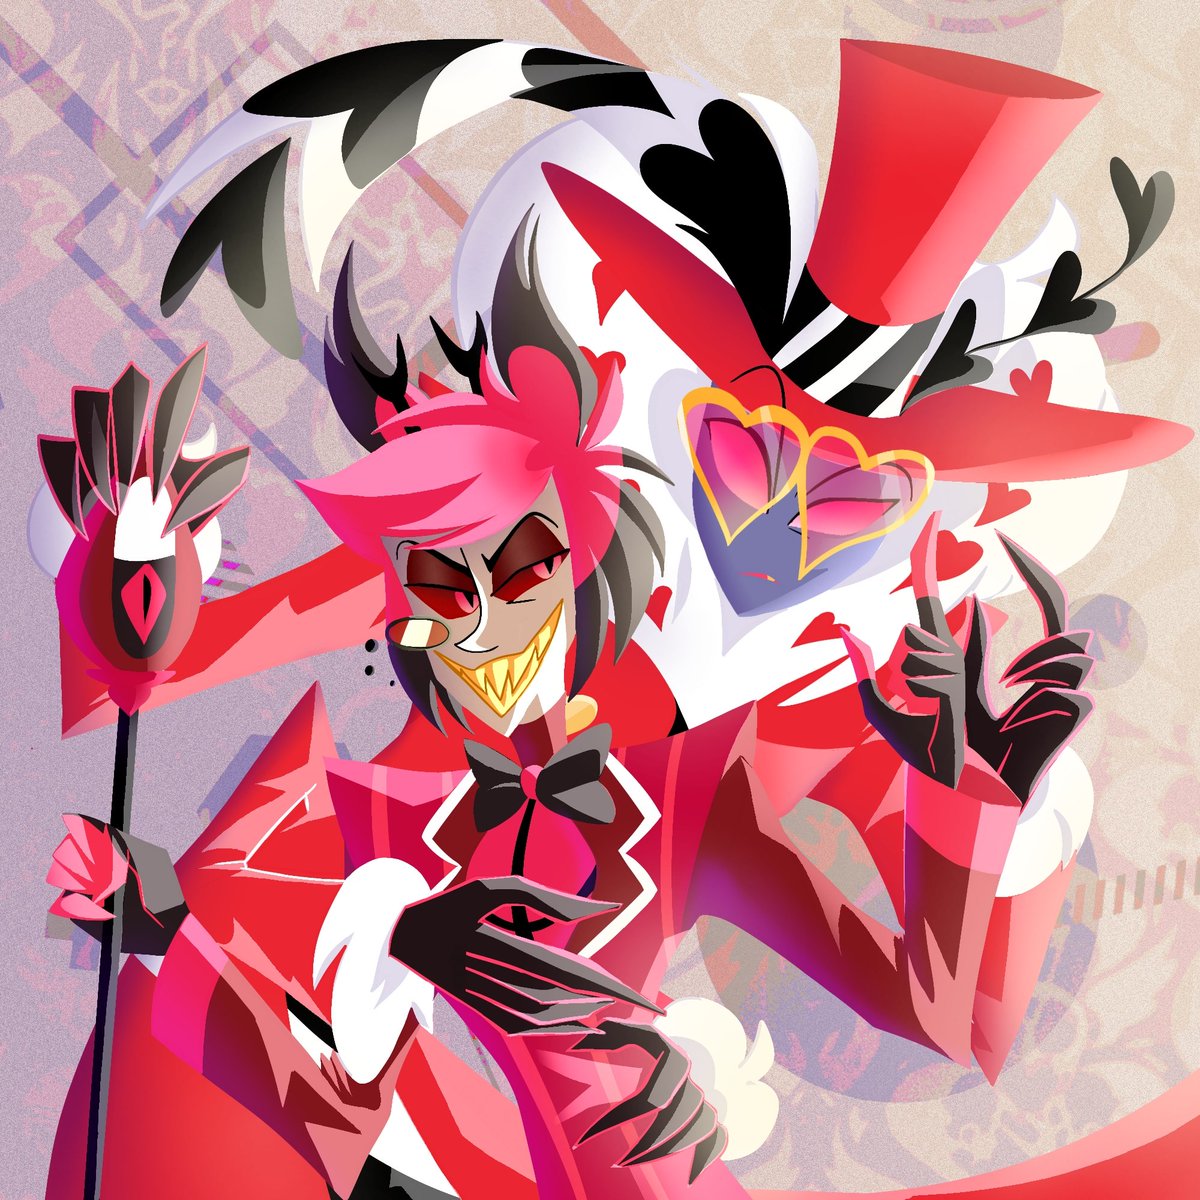 So I Attempted a new style for this? It was weird using mostly no black lineart...🤔🤭 Decided to do my 2 favs💅📻 and to @VivziePop for doing an absolutely wonderful job on the show!!!🎉 #HazbinHotel #hazbinhotelfanart #ValentinoHazbin #Valastor #alastorhazbinhotel